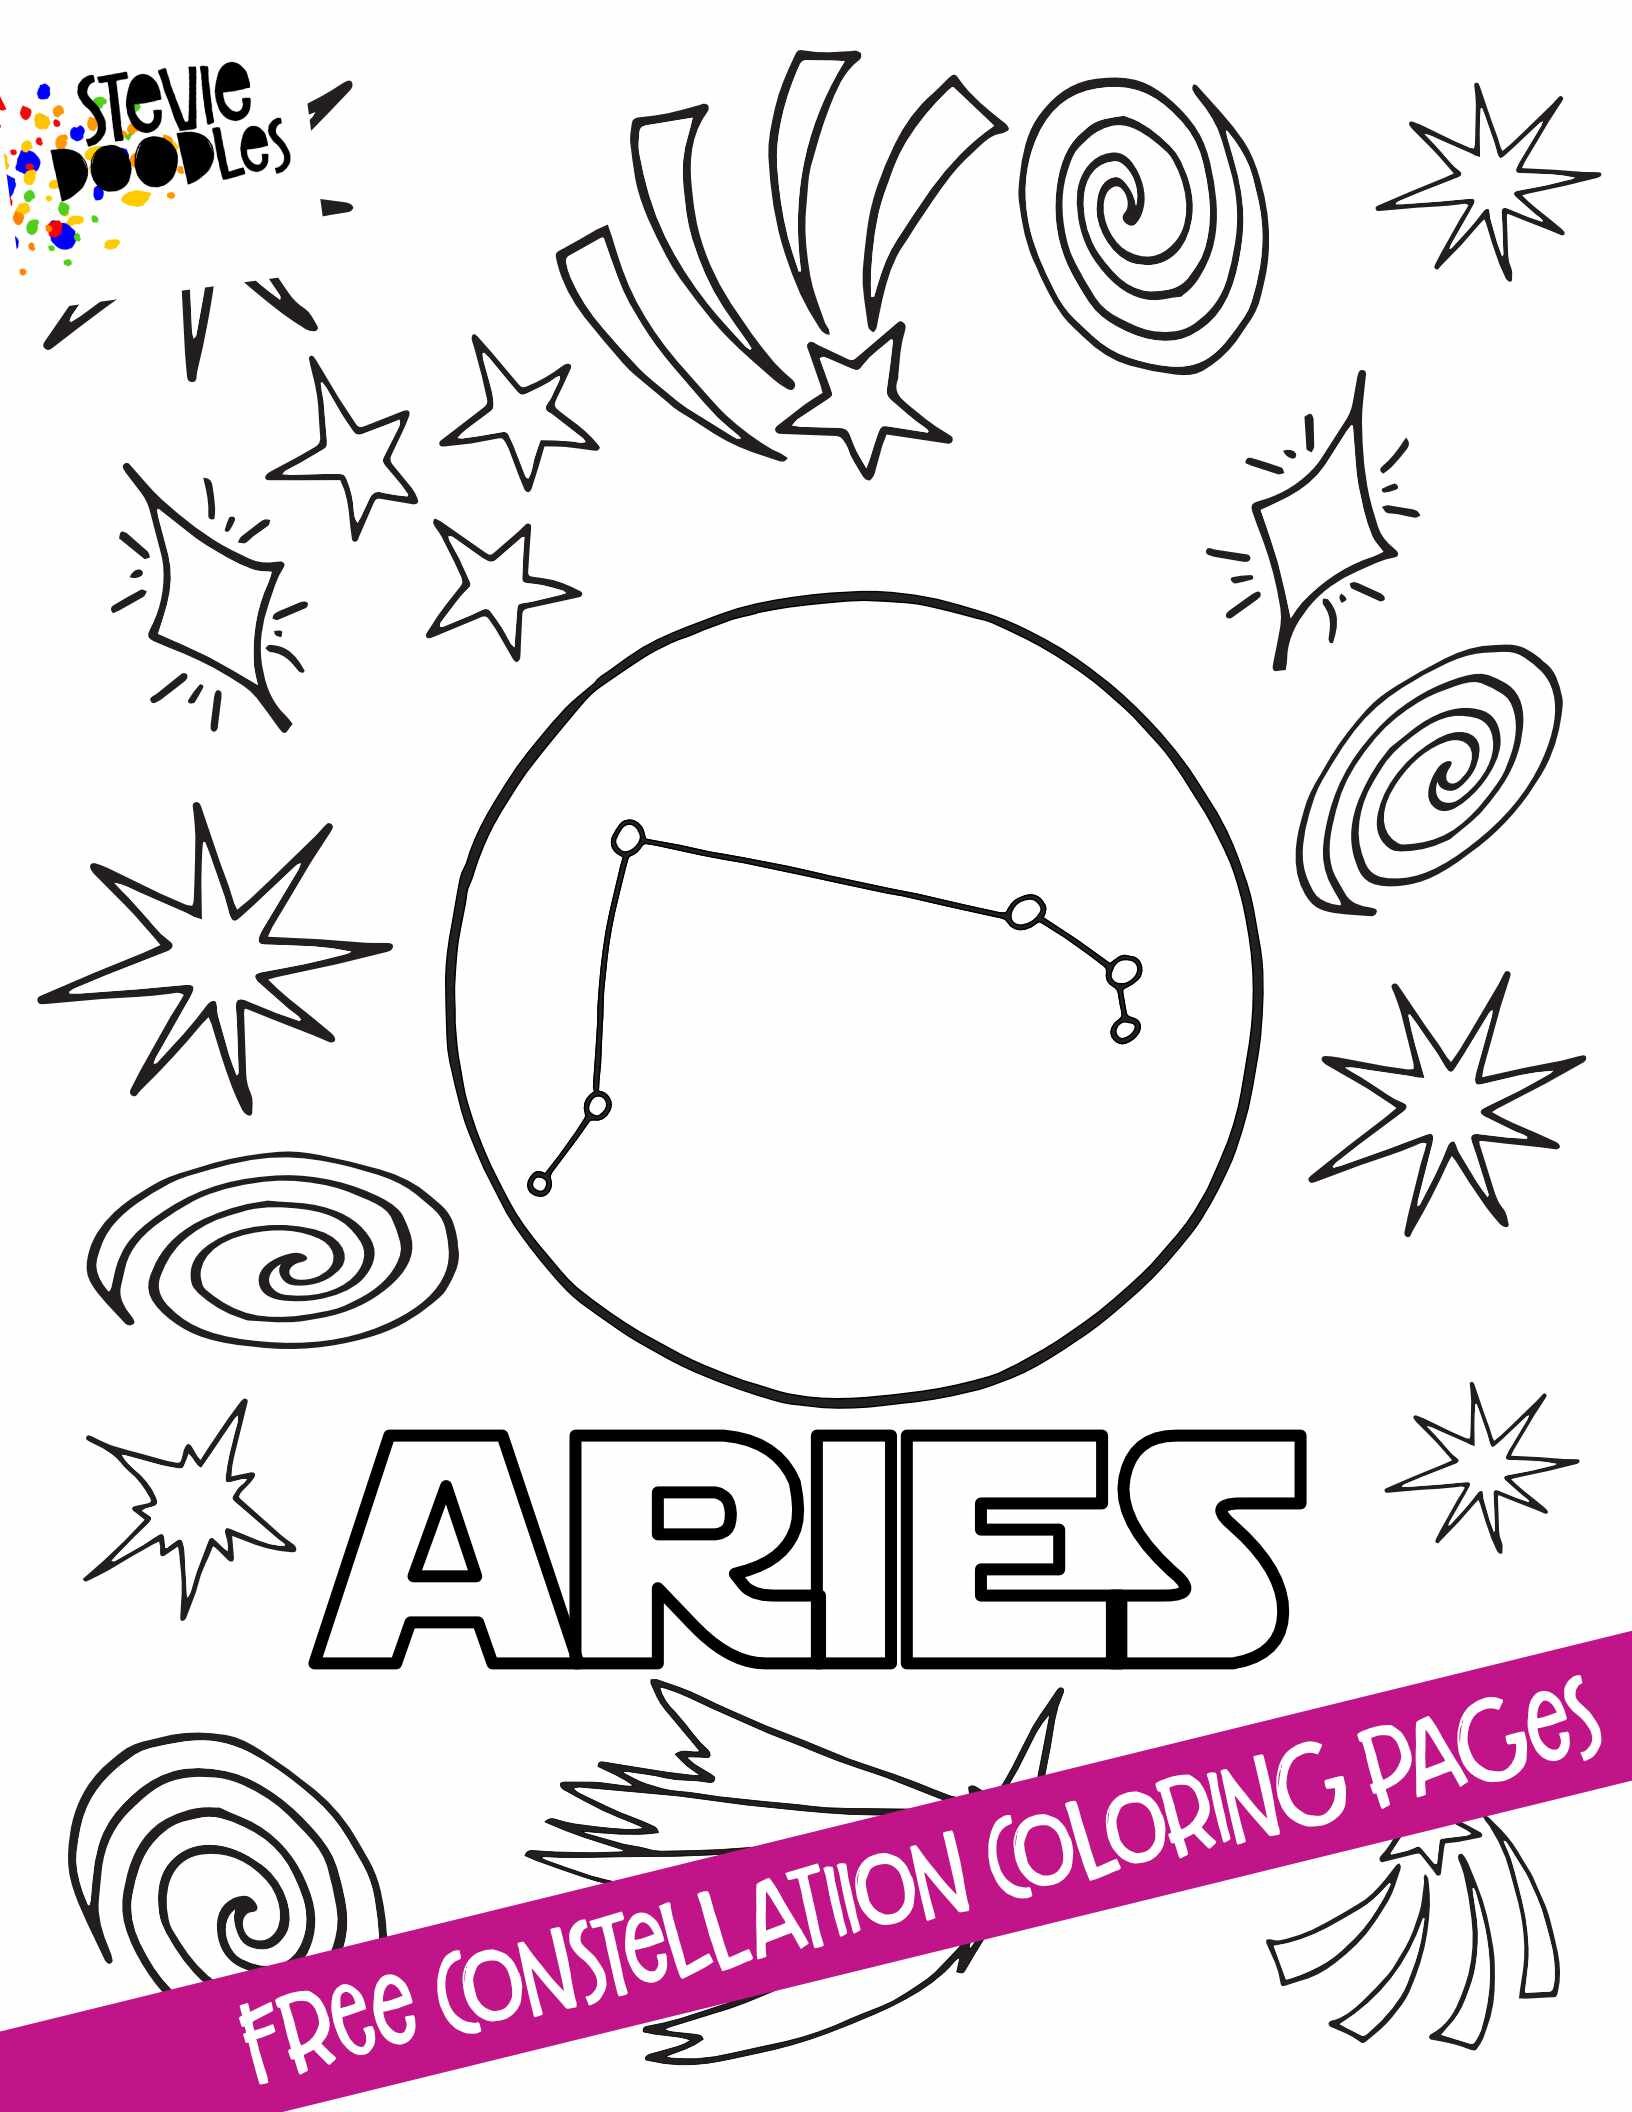 ARIES - 12 Free Constellation Coloring Pages - Over 1000 Free Coloring Pages CLICK HERE TO PRINT THE PAGE ABOVE